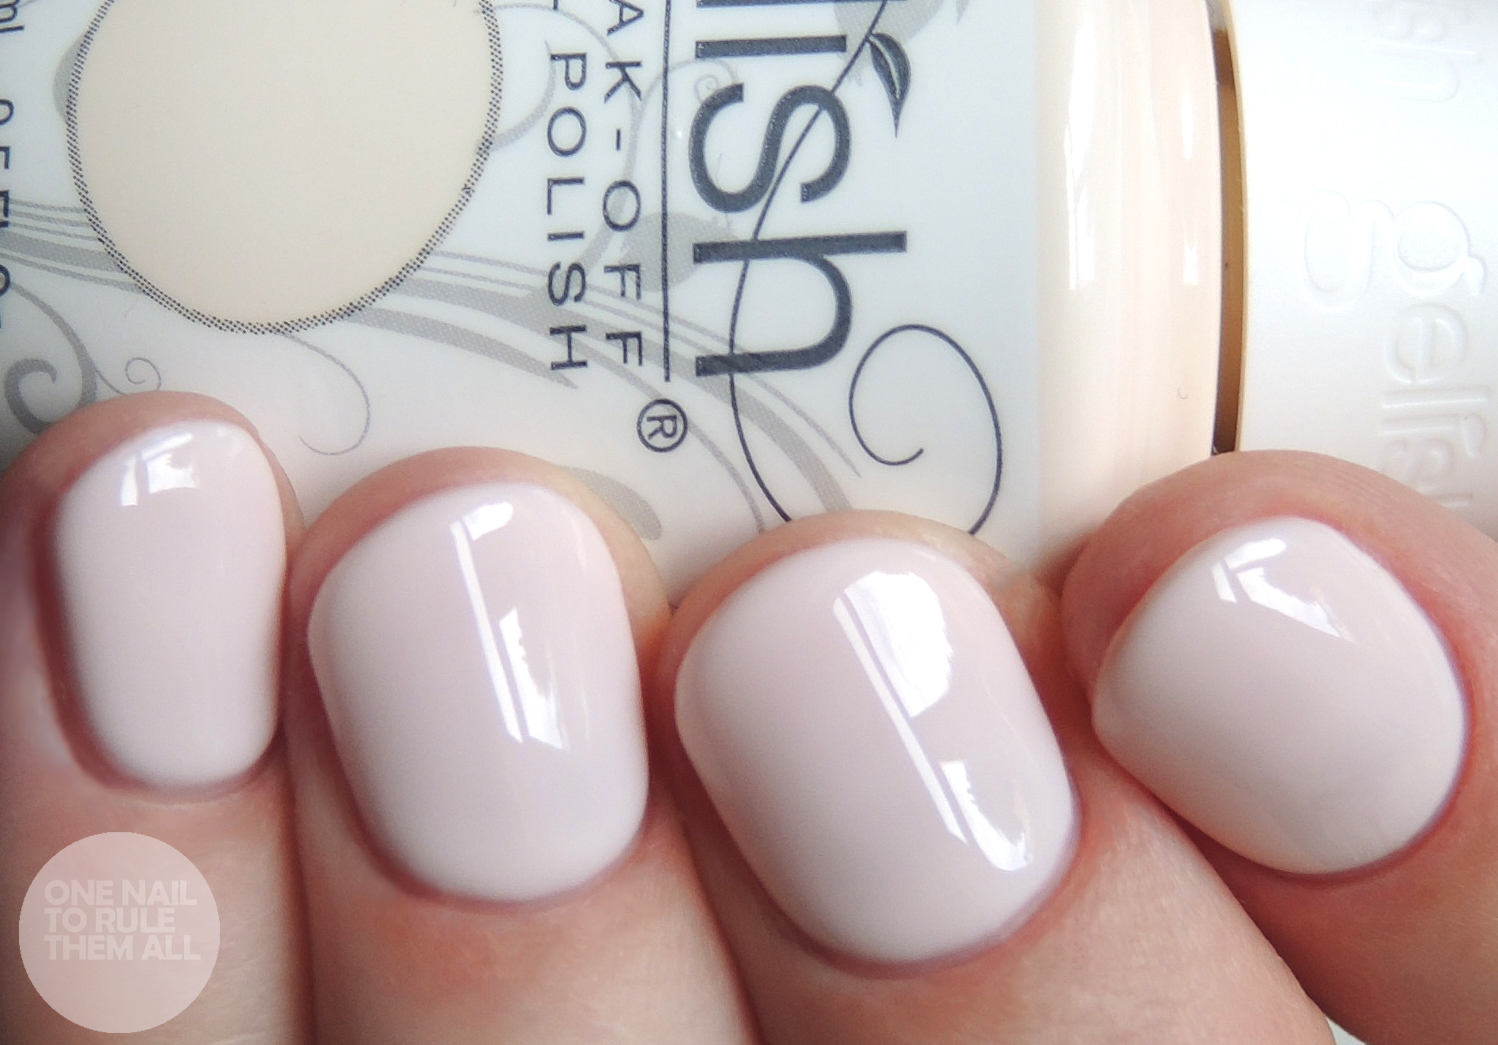 5. Gelish in "Forever Beauty" - wide 11